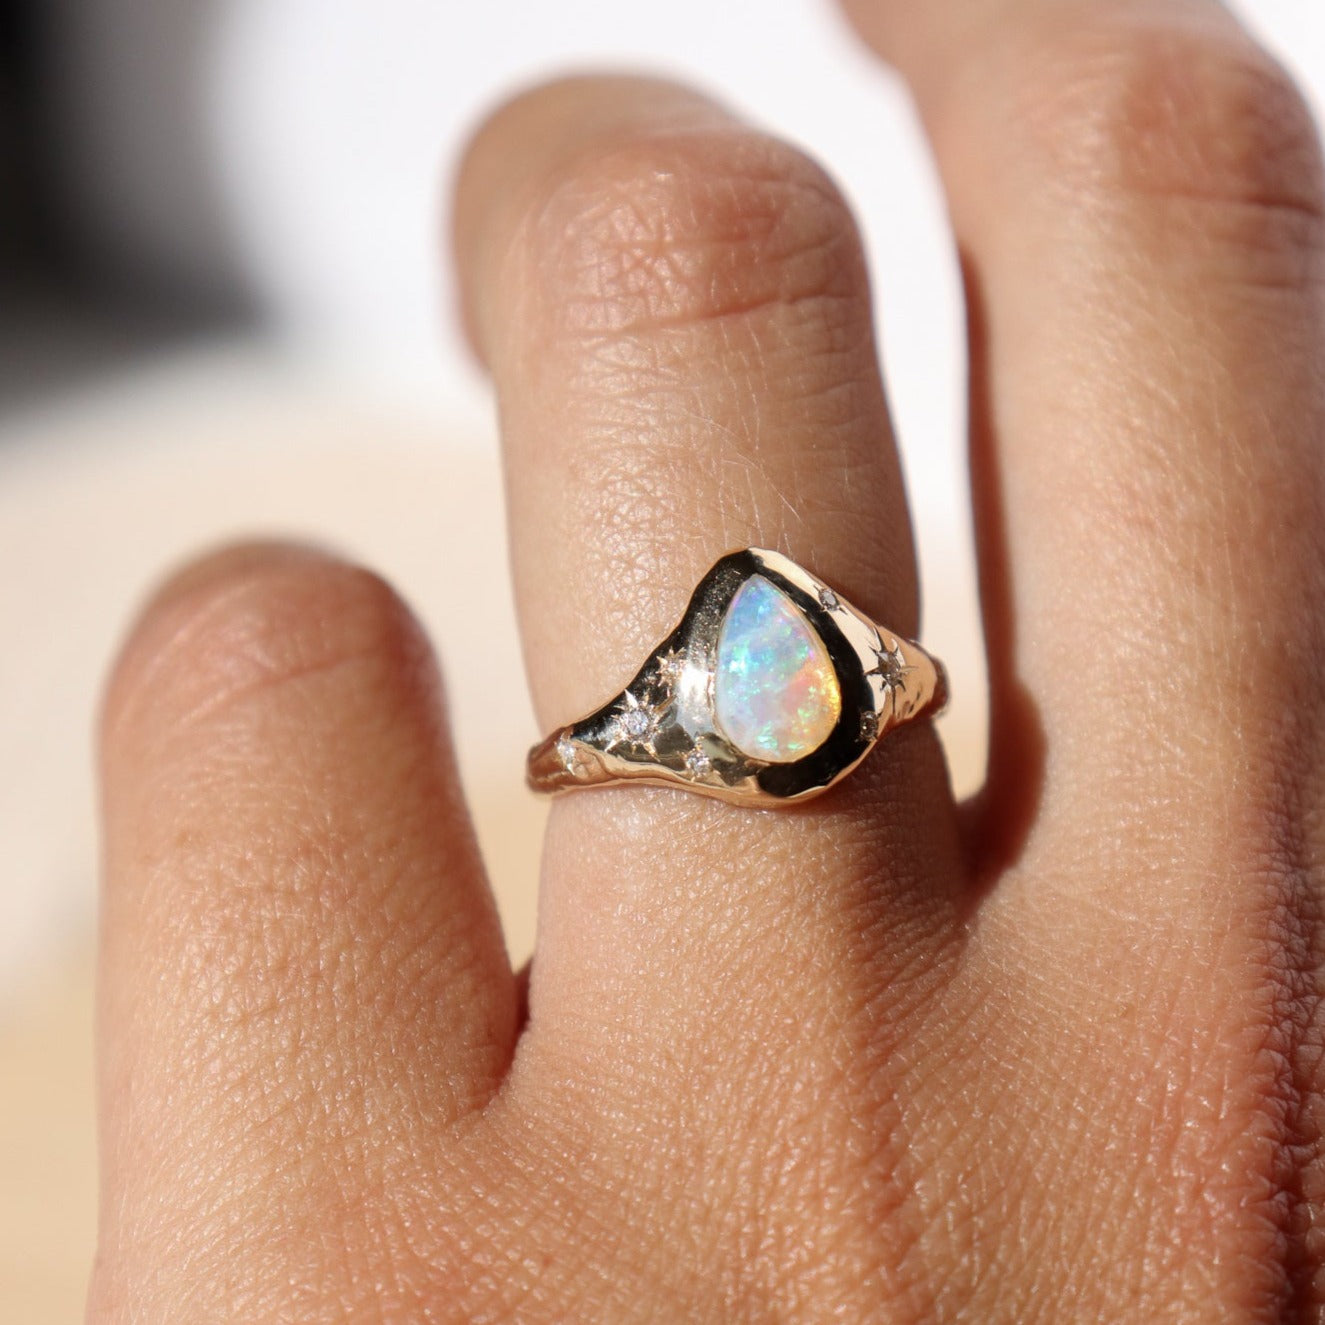 3/4 view of a gold opal ring with diamond star set accents